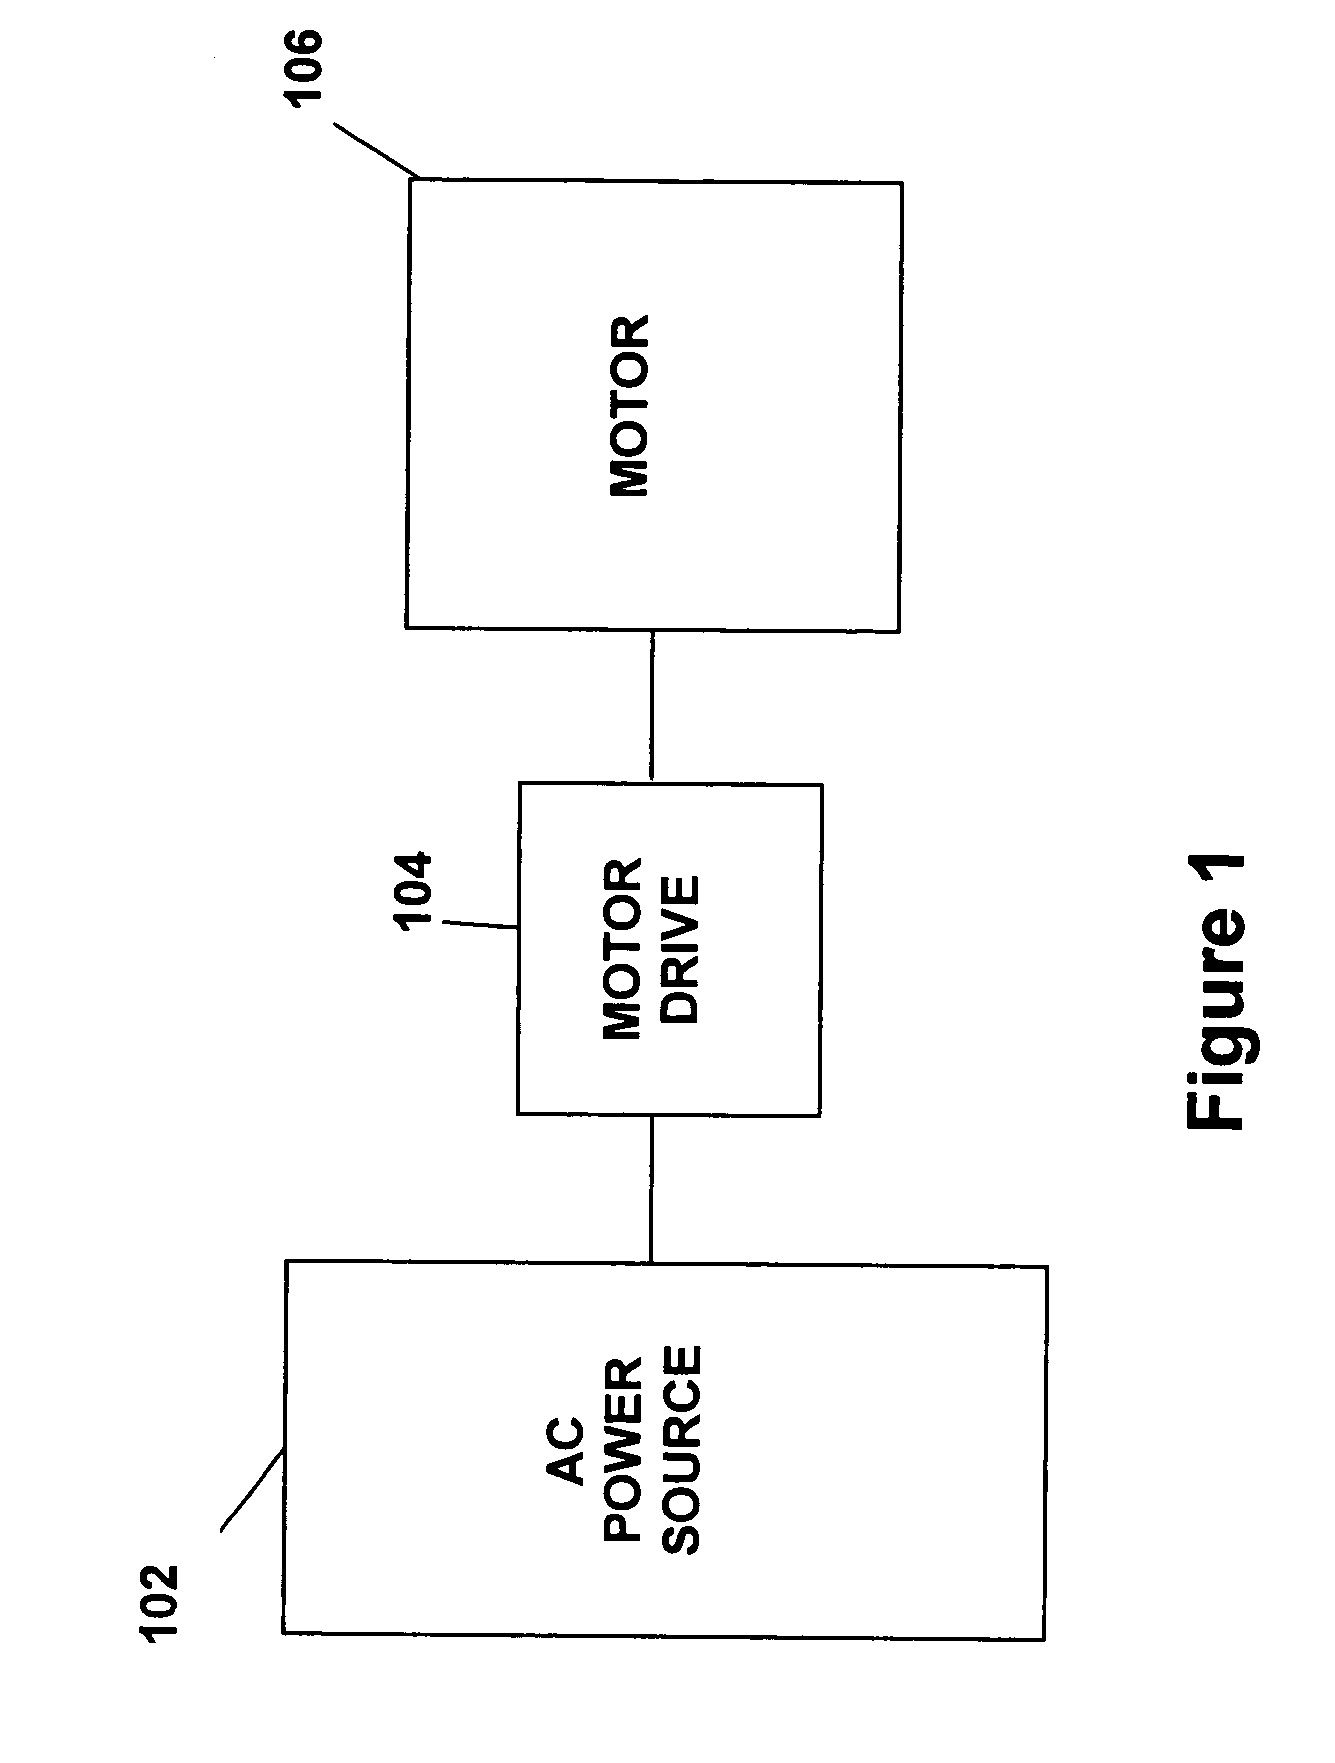 System and method for compressor capacity modulation